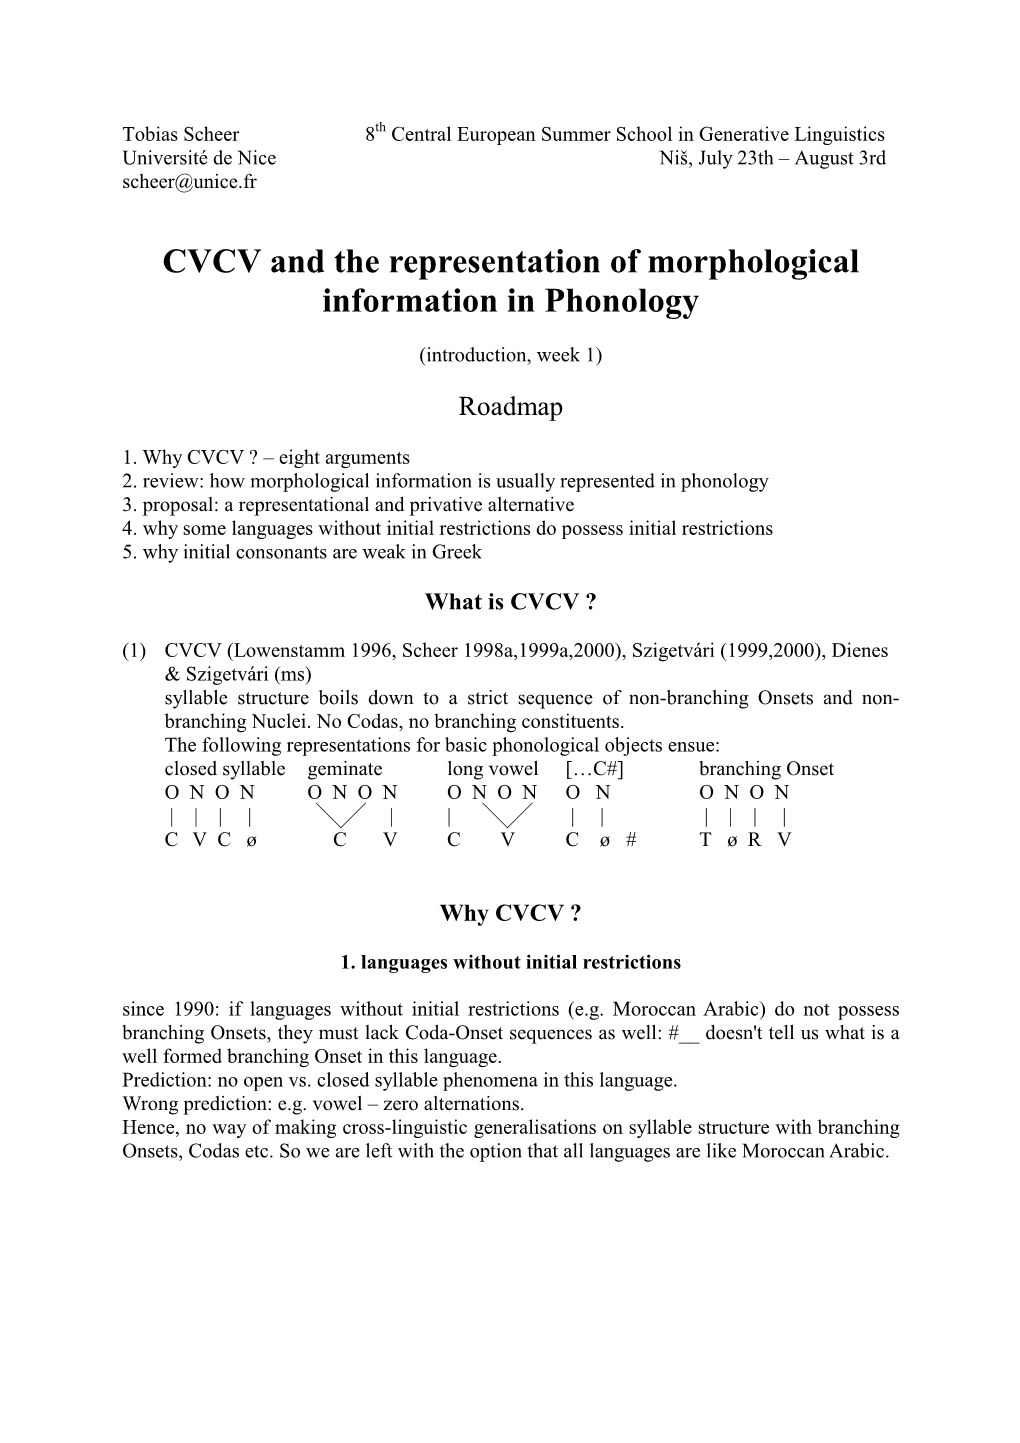 CVCV and the Representation of Morphological Information in Phonology